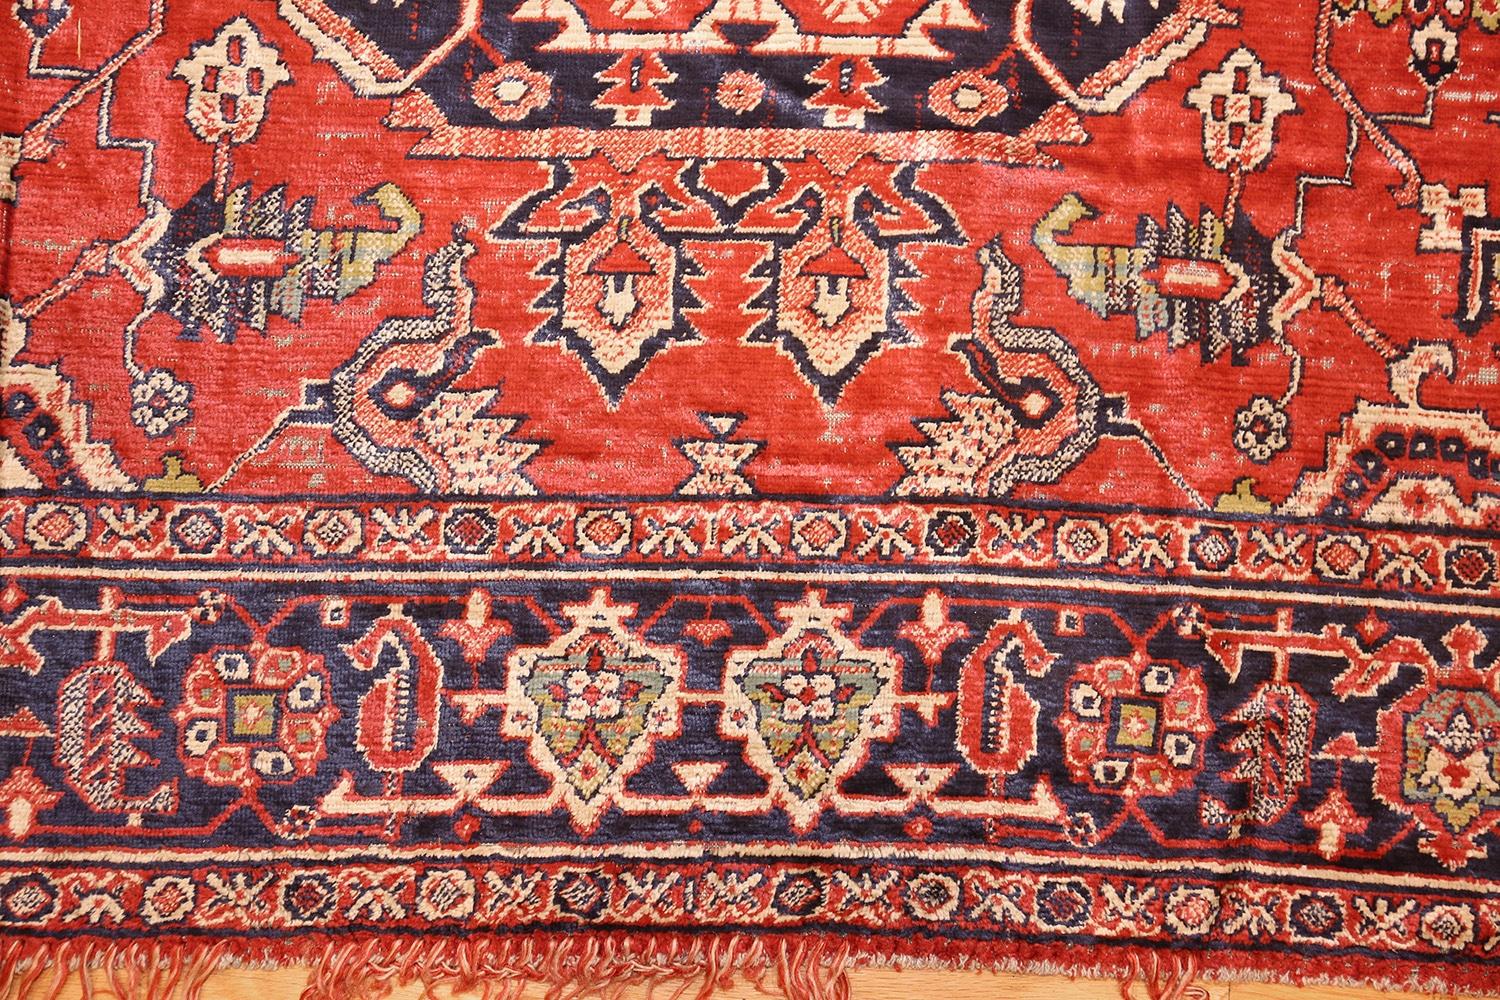 Antique American Chenille Rug. Size: 4 ft 7 in x 6 ft (1.4 m x 1.83 m) 2